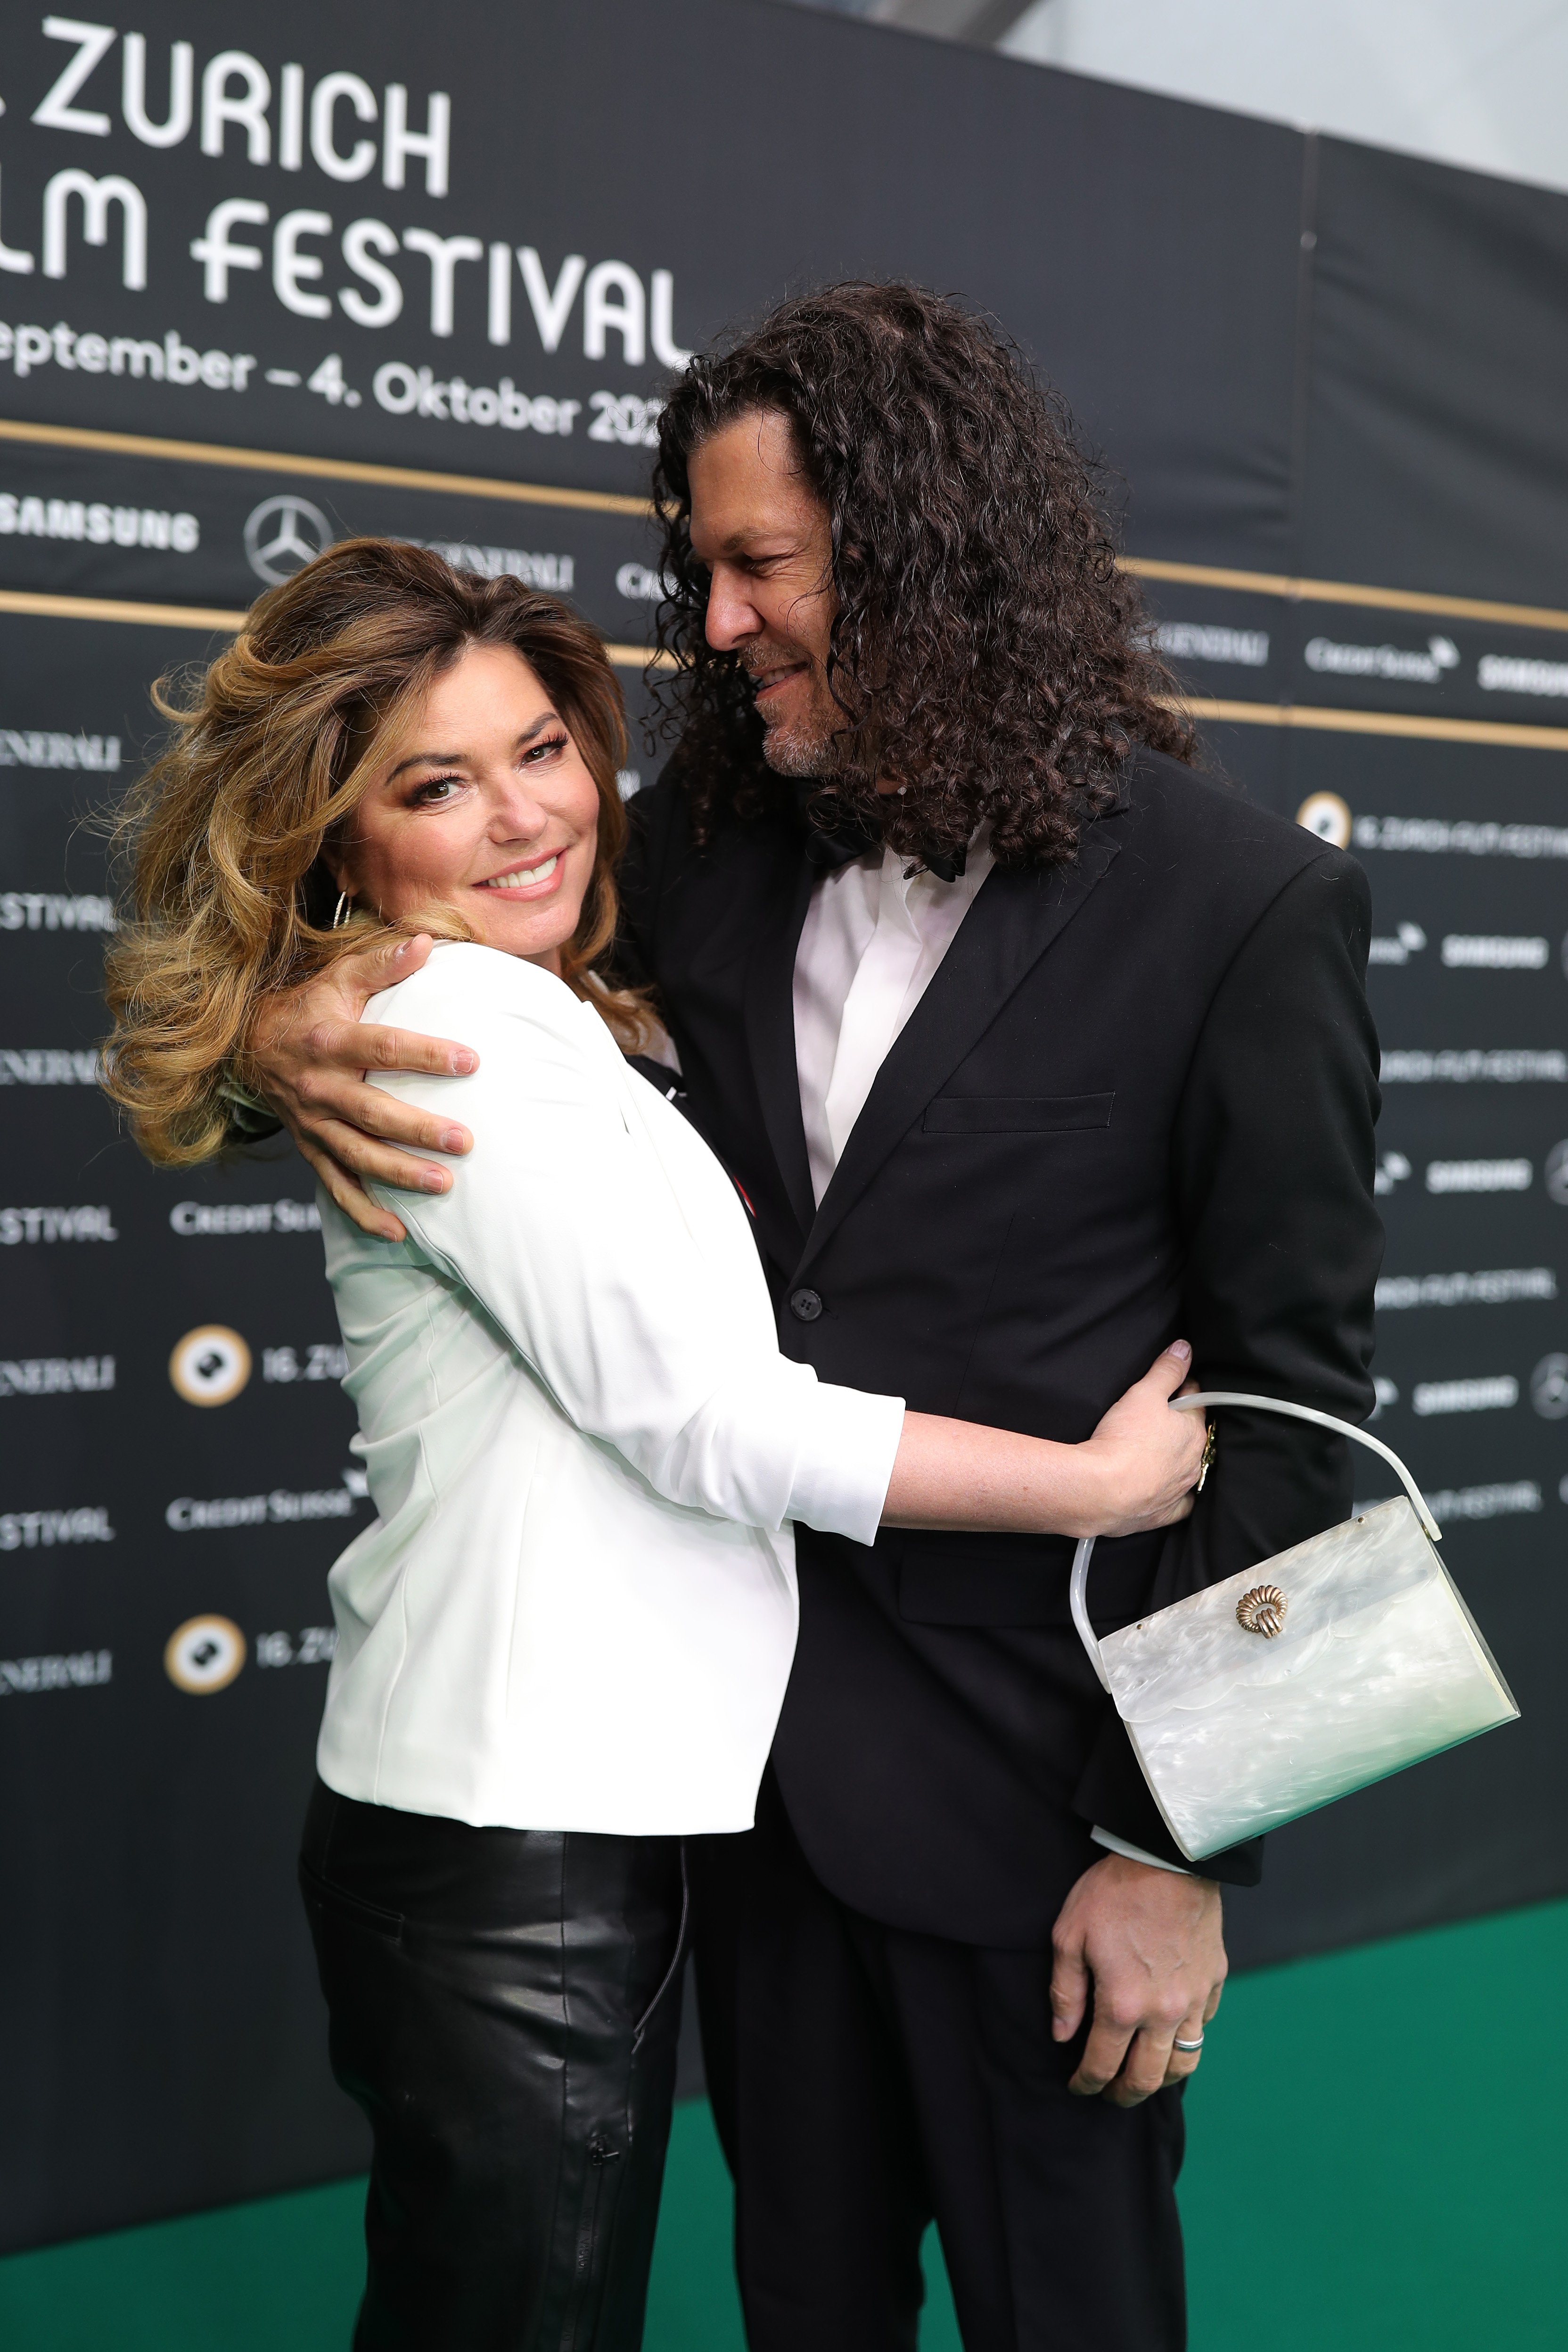 Shania Twain and husband Frederic Thiebaud attend a photocall at the Zurich Film Festival in Switzerland on September 26, 2020 | Photo: Getty Images